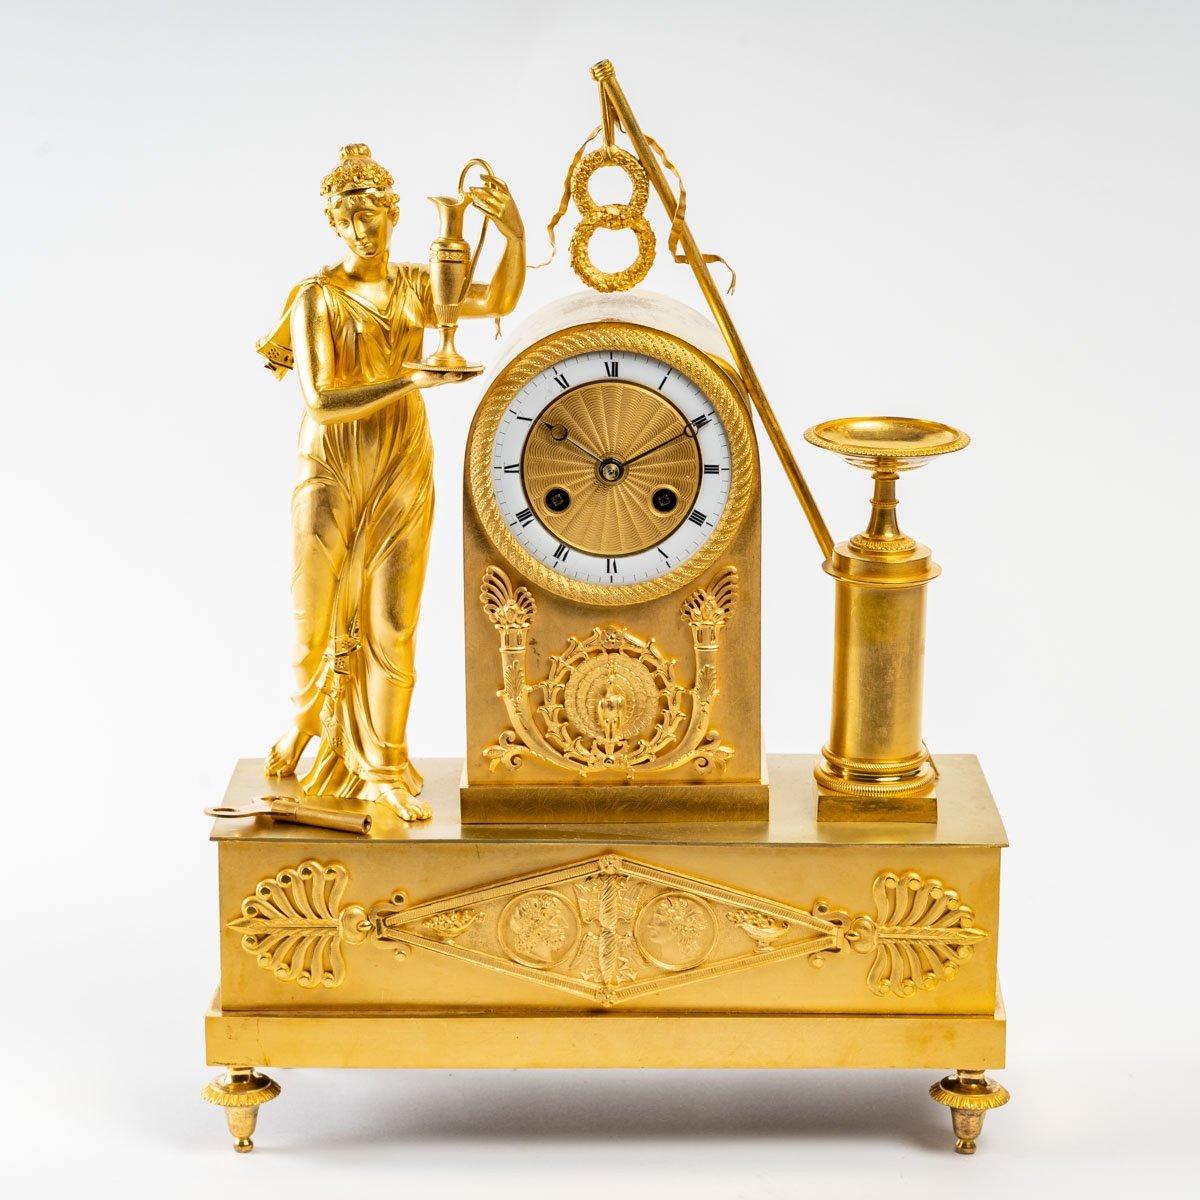 Sublime pendulum in gilded bronze, the mercury gilding is original.
The dial is white enamelled and the hours are written in Roman numerals.

Period: Restoration
Dimensions: Height: 48.5cm x Length: 34.5cm x Depth: 12.5cm
Original mechanism